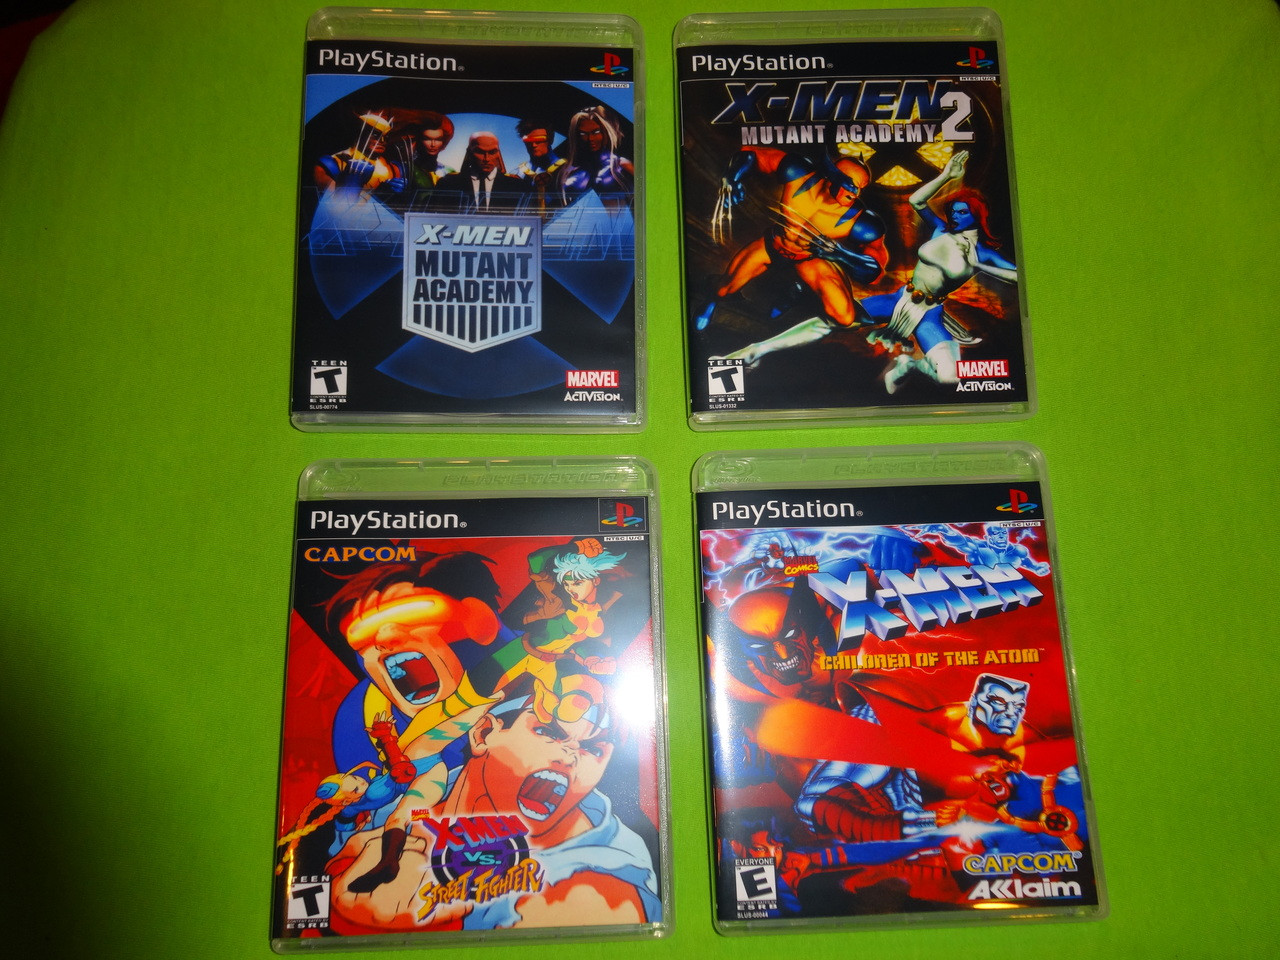 Playstation 1 (PS1) CD Games for Modded/Modified Playstation 1/PSOne  (PS1/PS One)